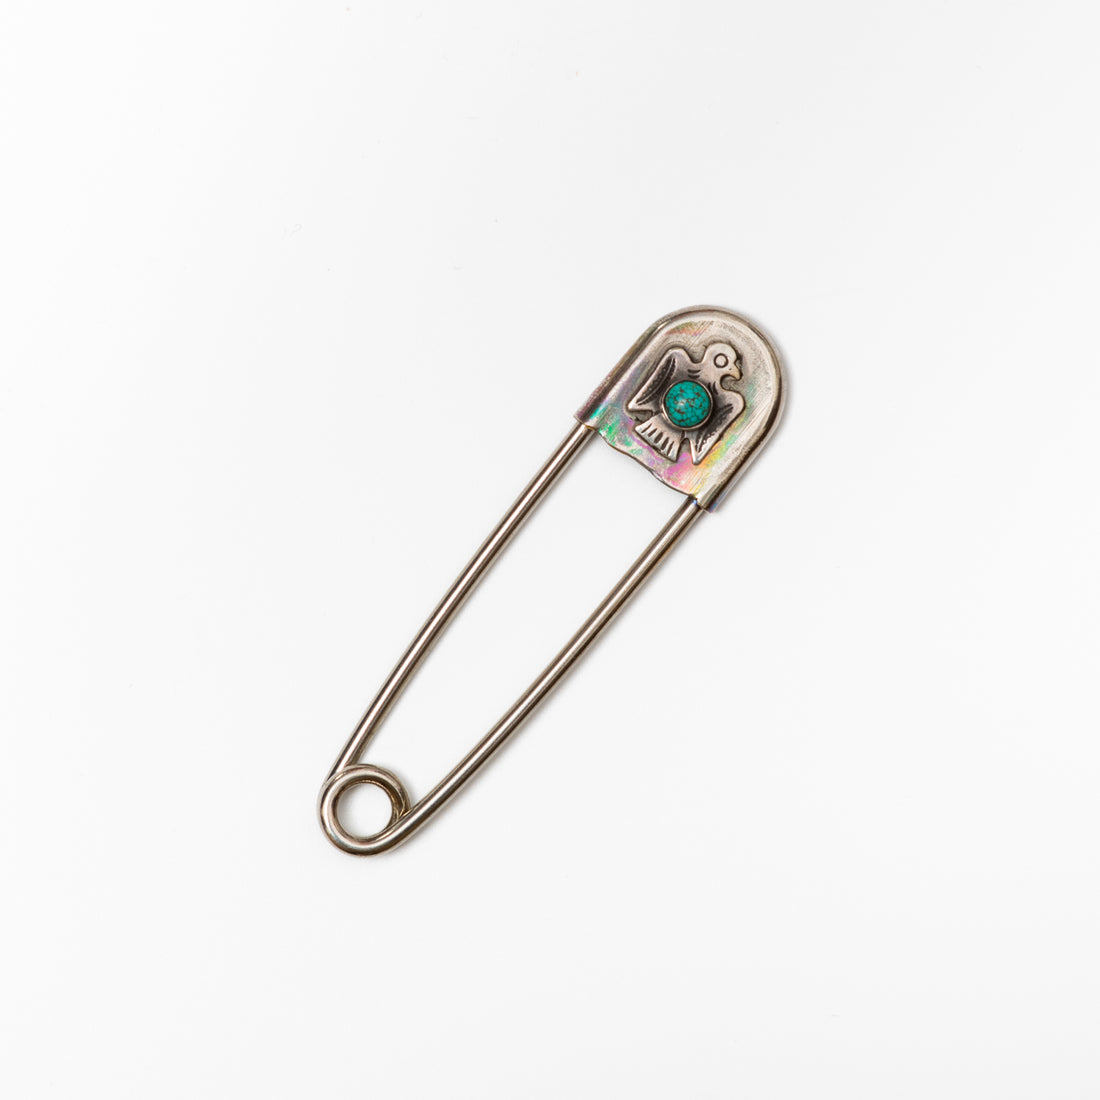 Red Rabbit Trading Co. XL Safety Pin W/Turquoise